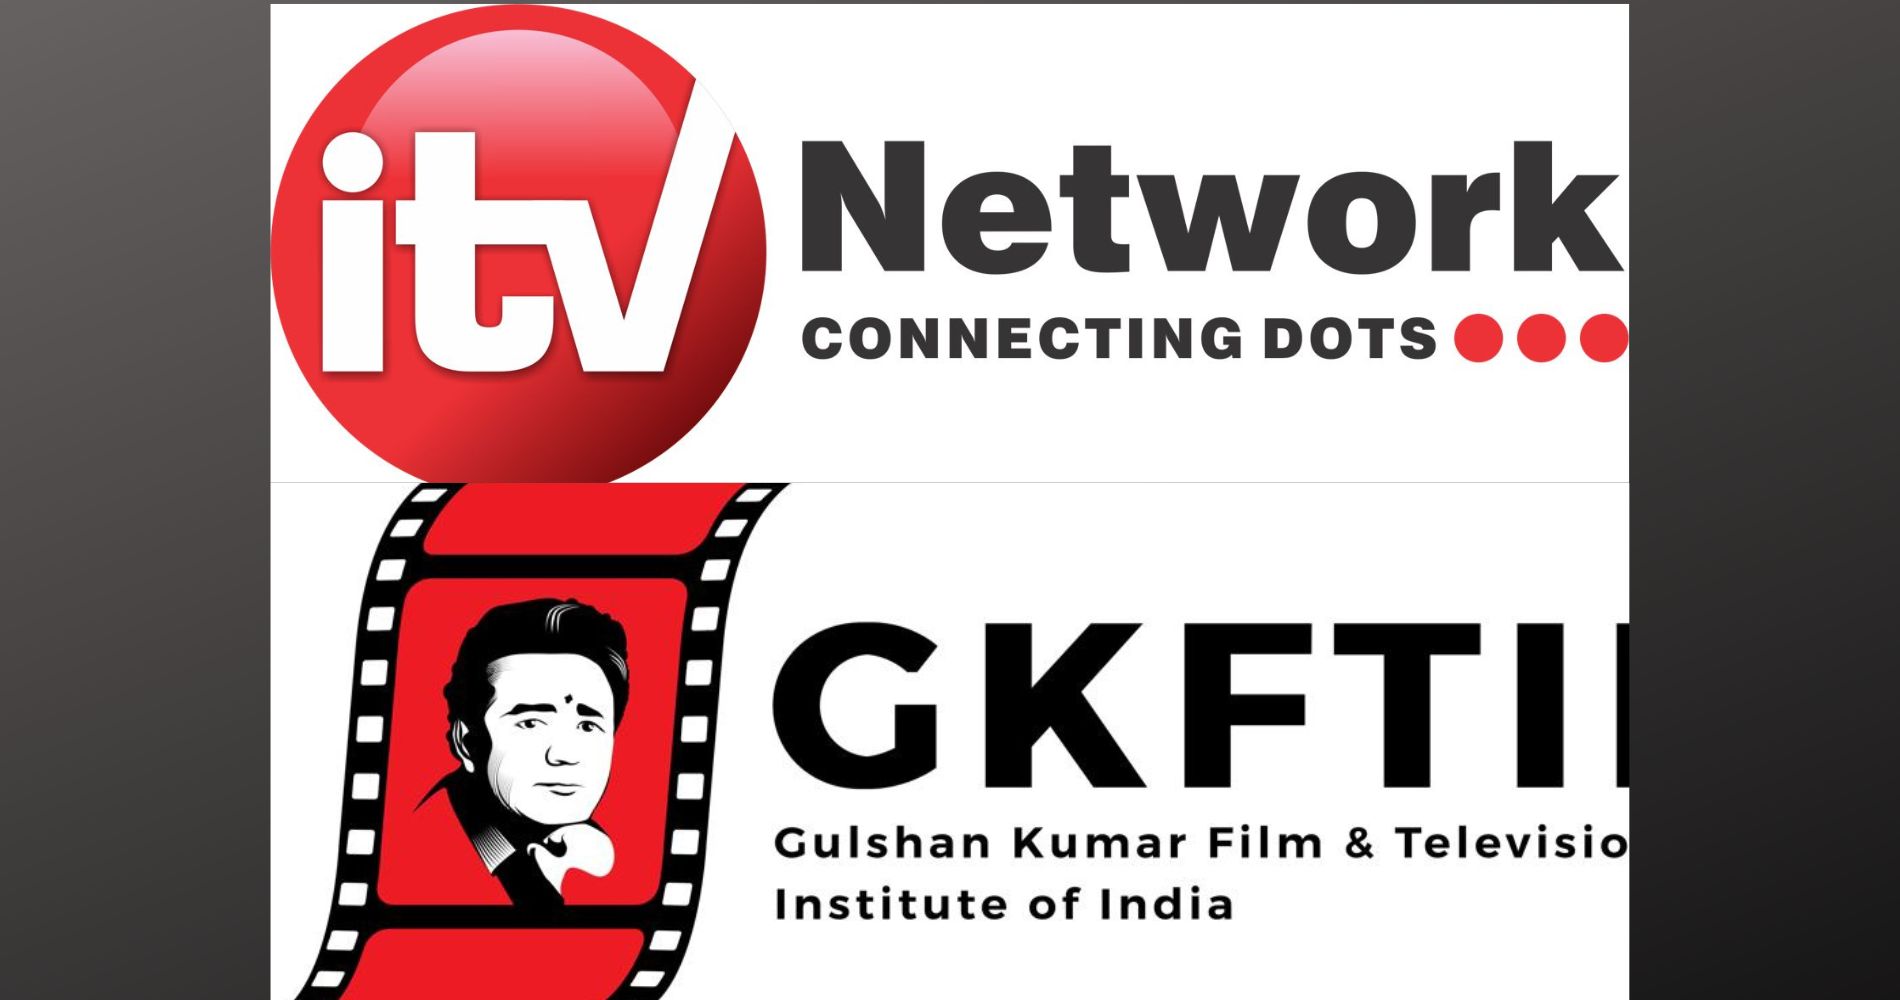 iTV Network inks pact with GKFTII to enrich Academic-Industry Collaboration